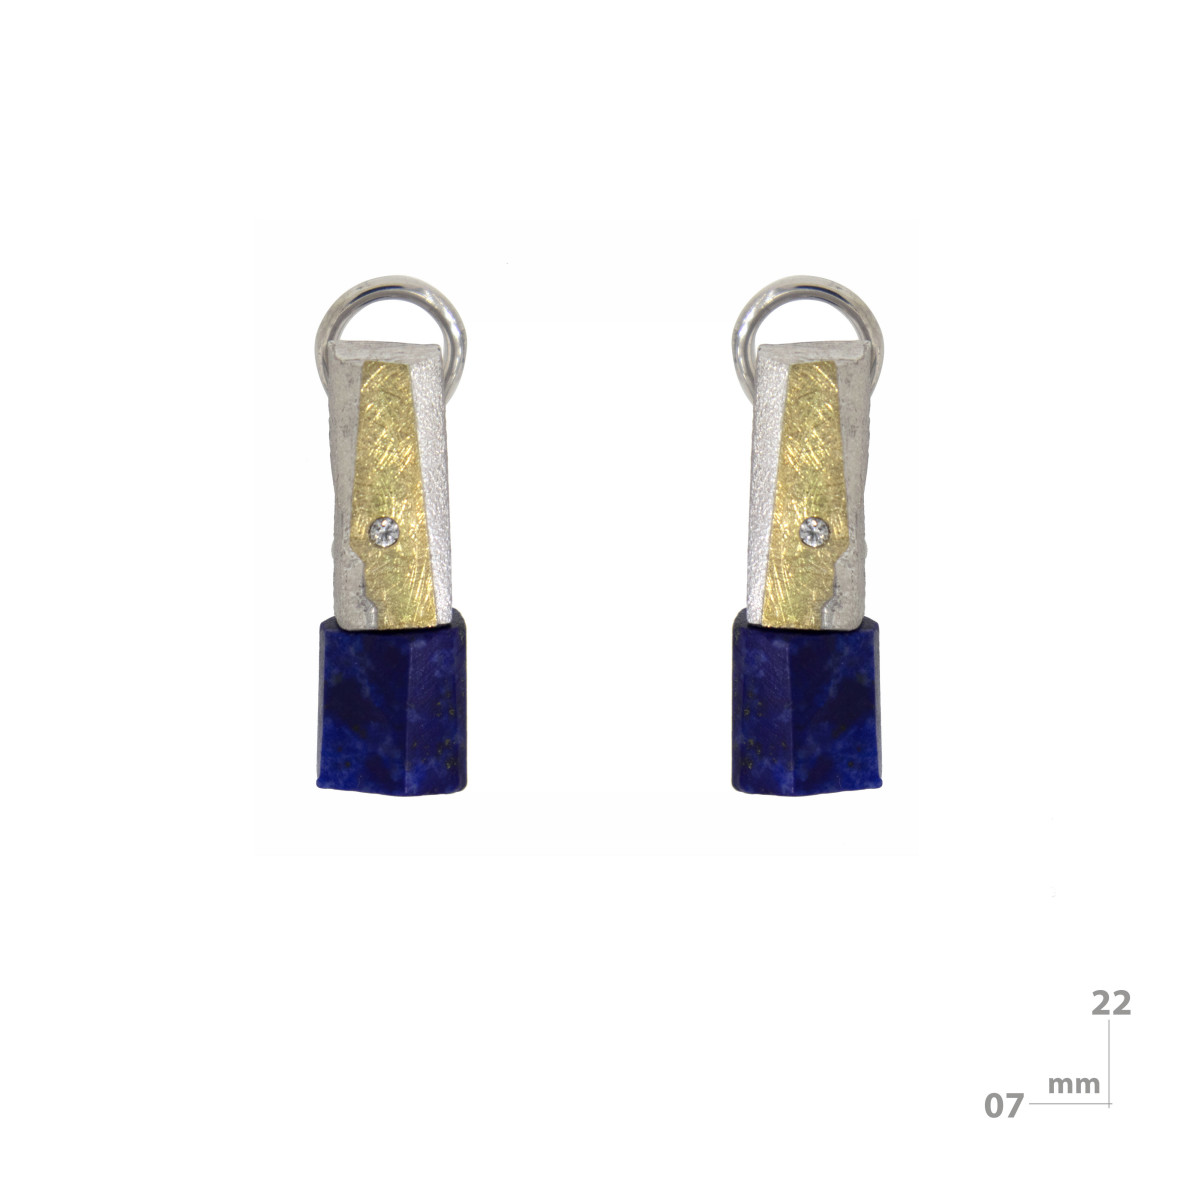 Silver, gold, lapis lazuli and brilliant earrings